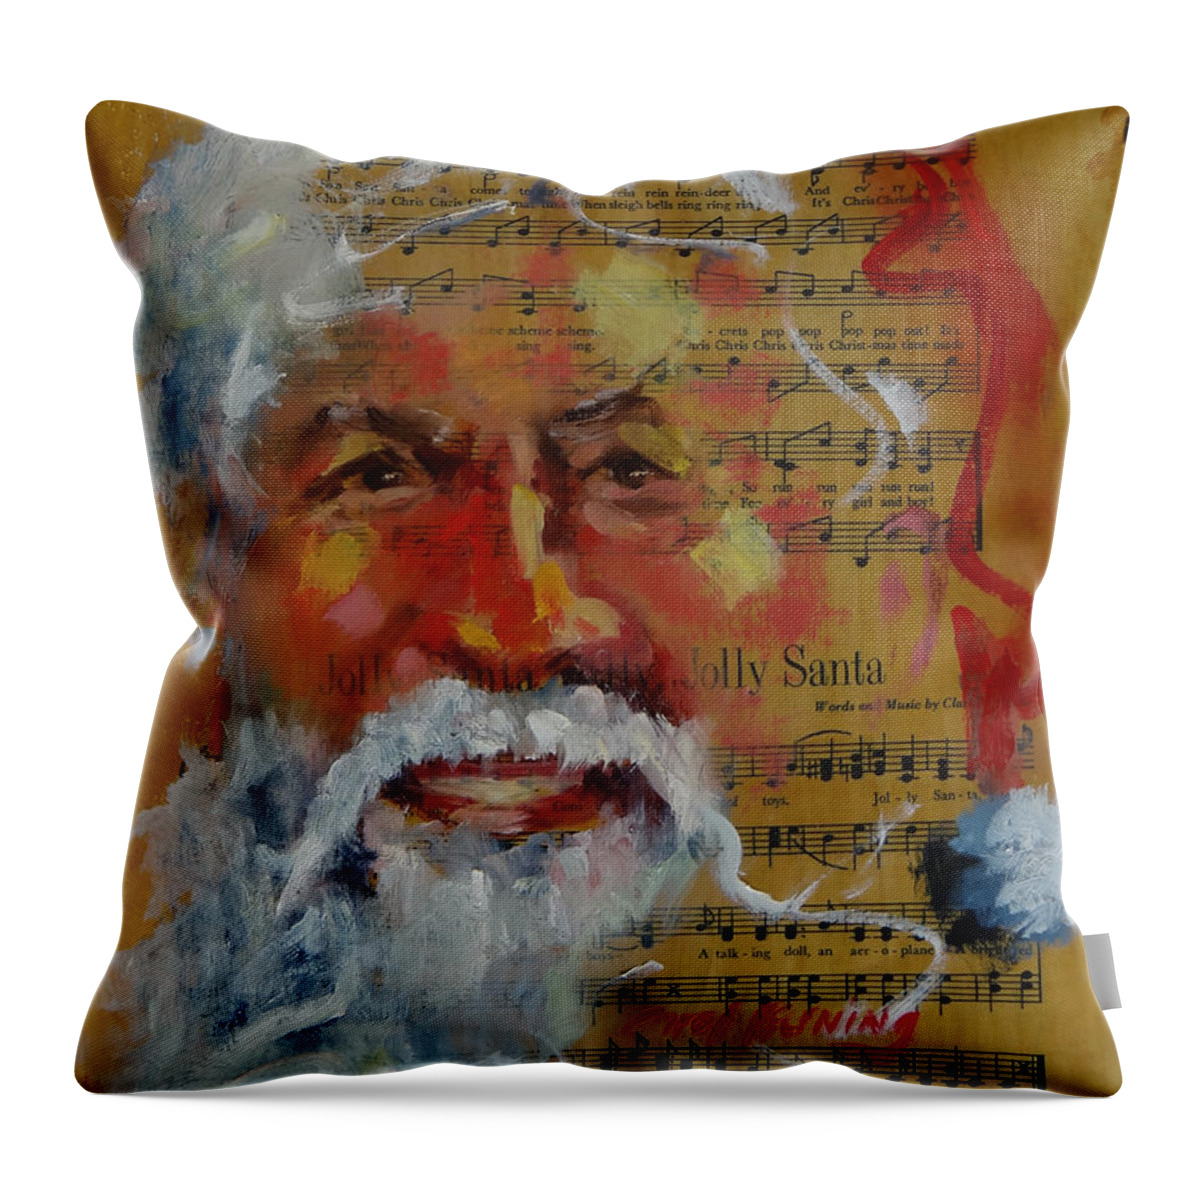  Throw Pillow featuring the painting Jolly Santa by Carol Berning